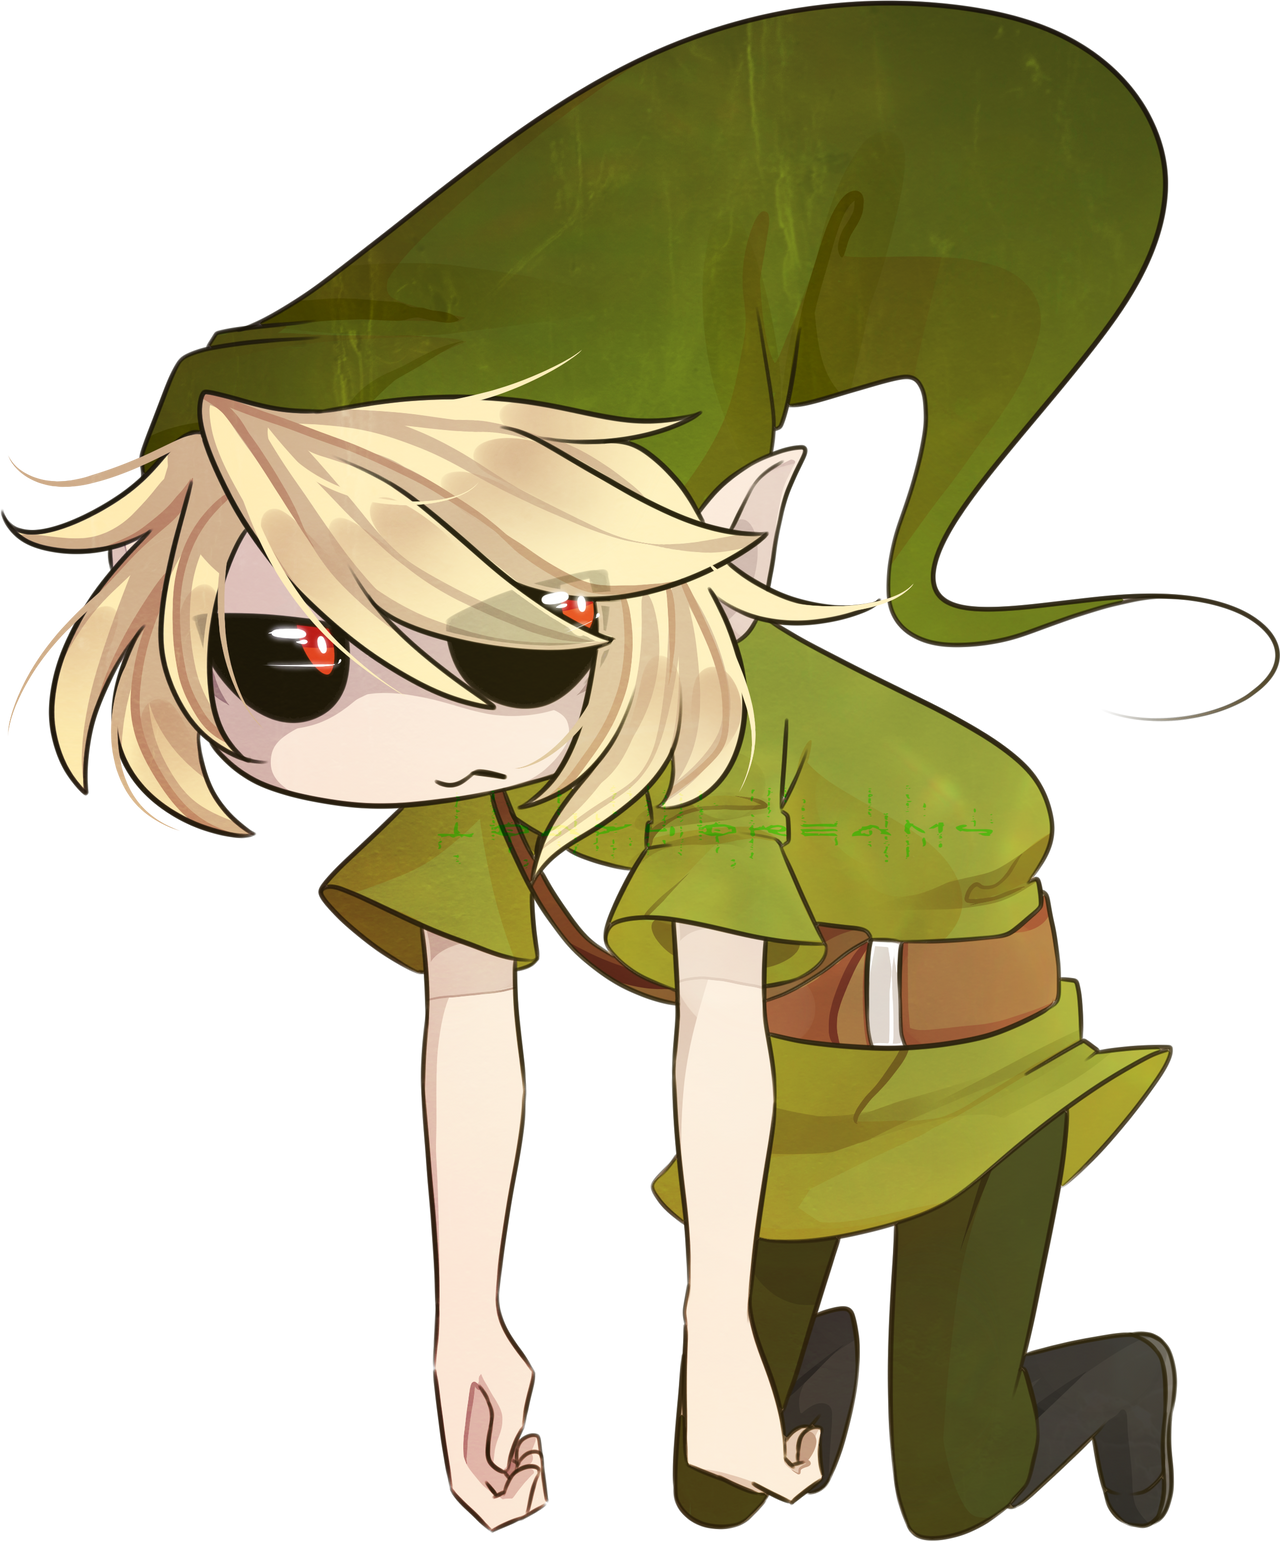 Ben Drowned By 1Day4Dreams On DeviantArt.